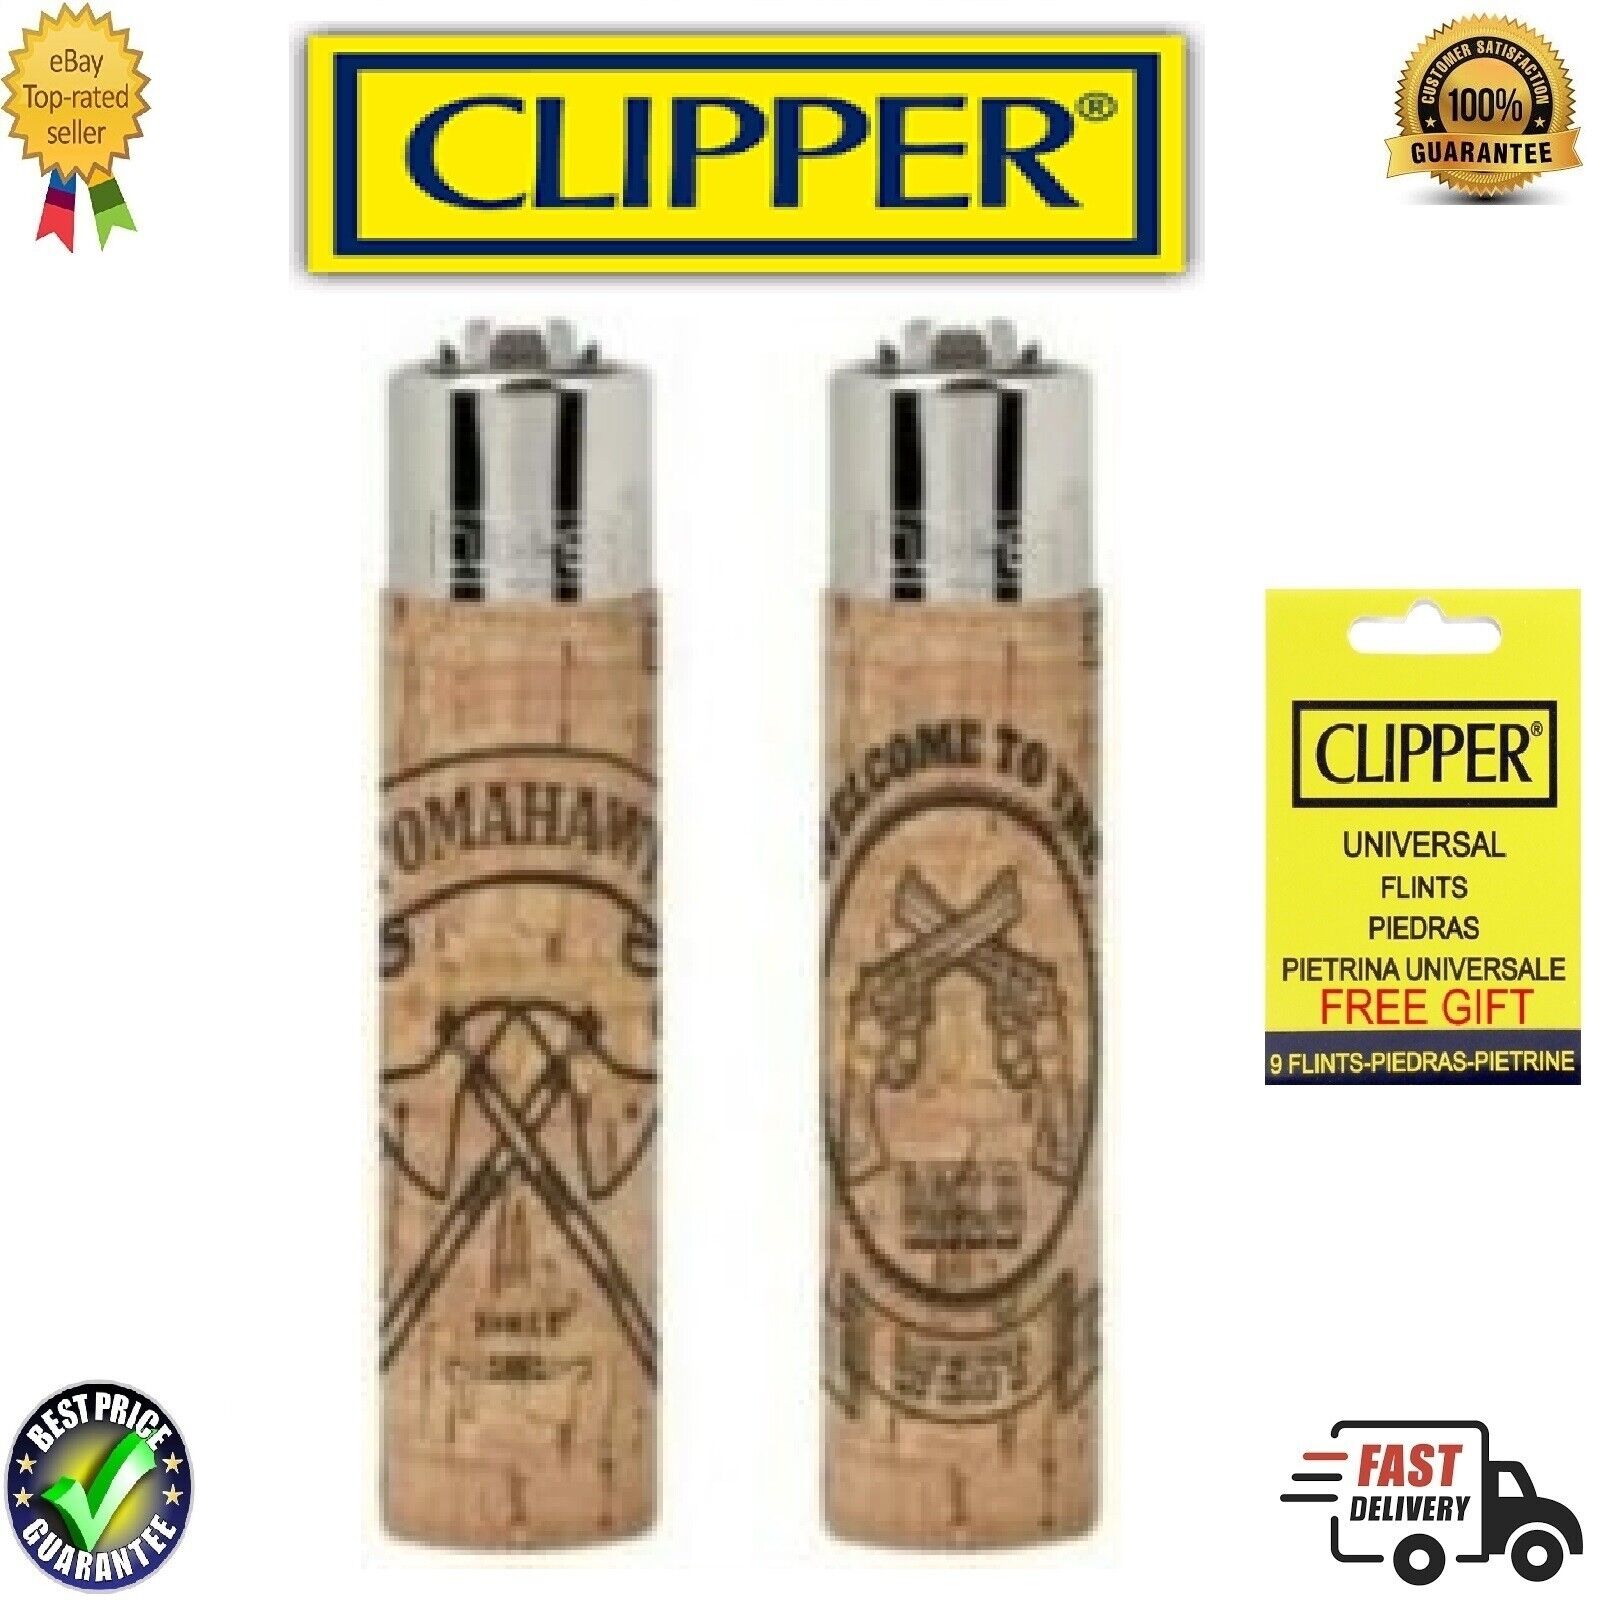 2 x Clipper Lighters + NATURAL CORK #2 Covers COWBOYS & INDIANS Design Full 